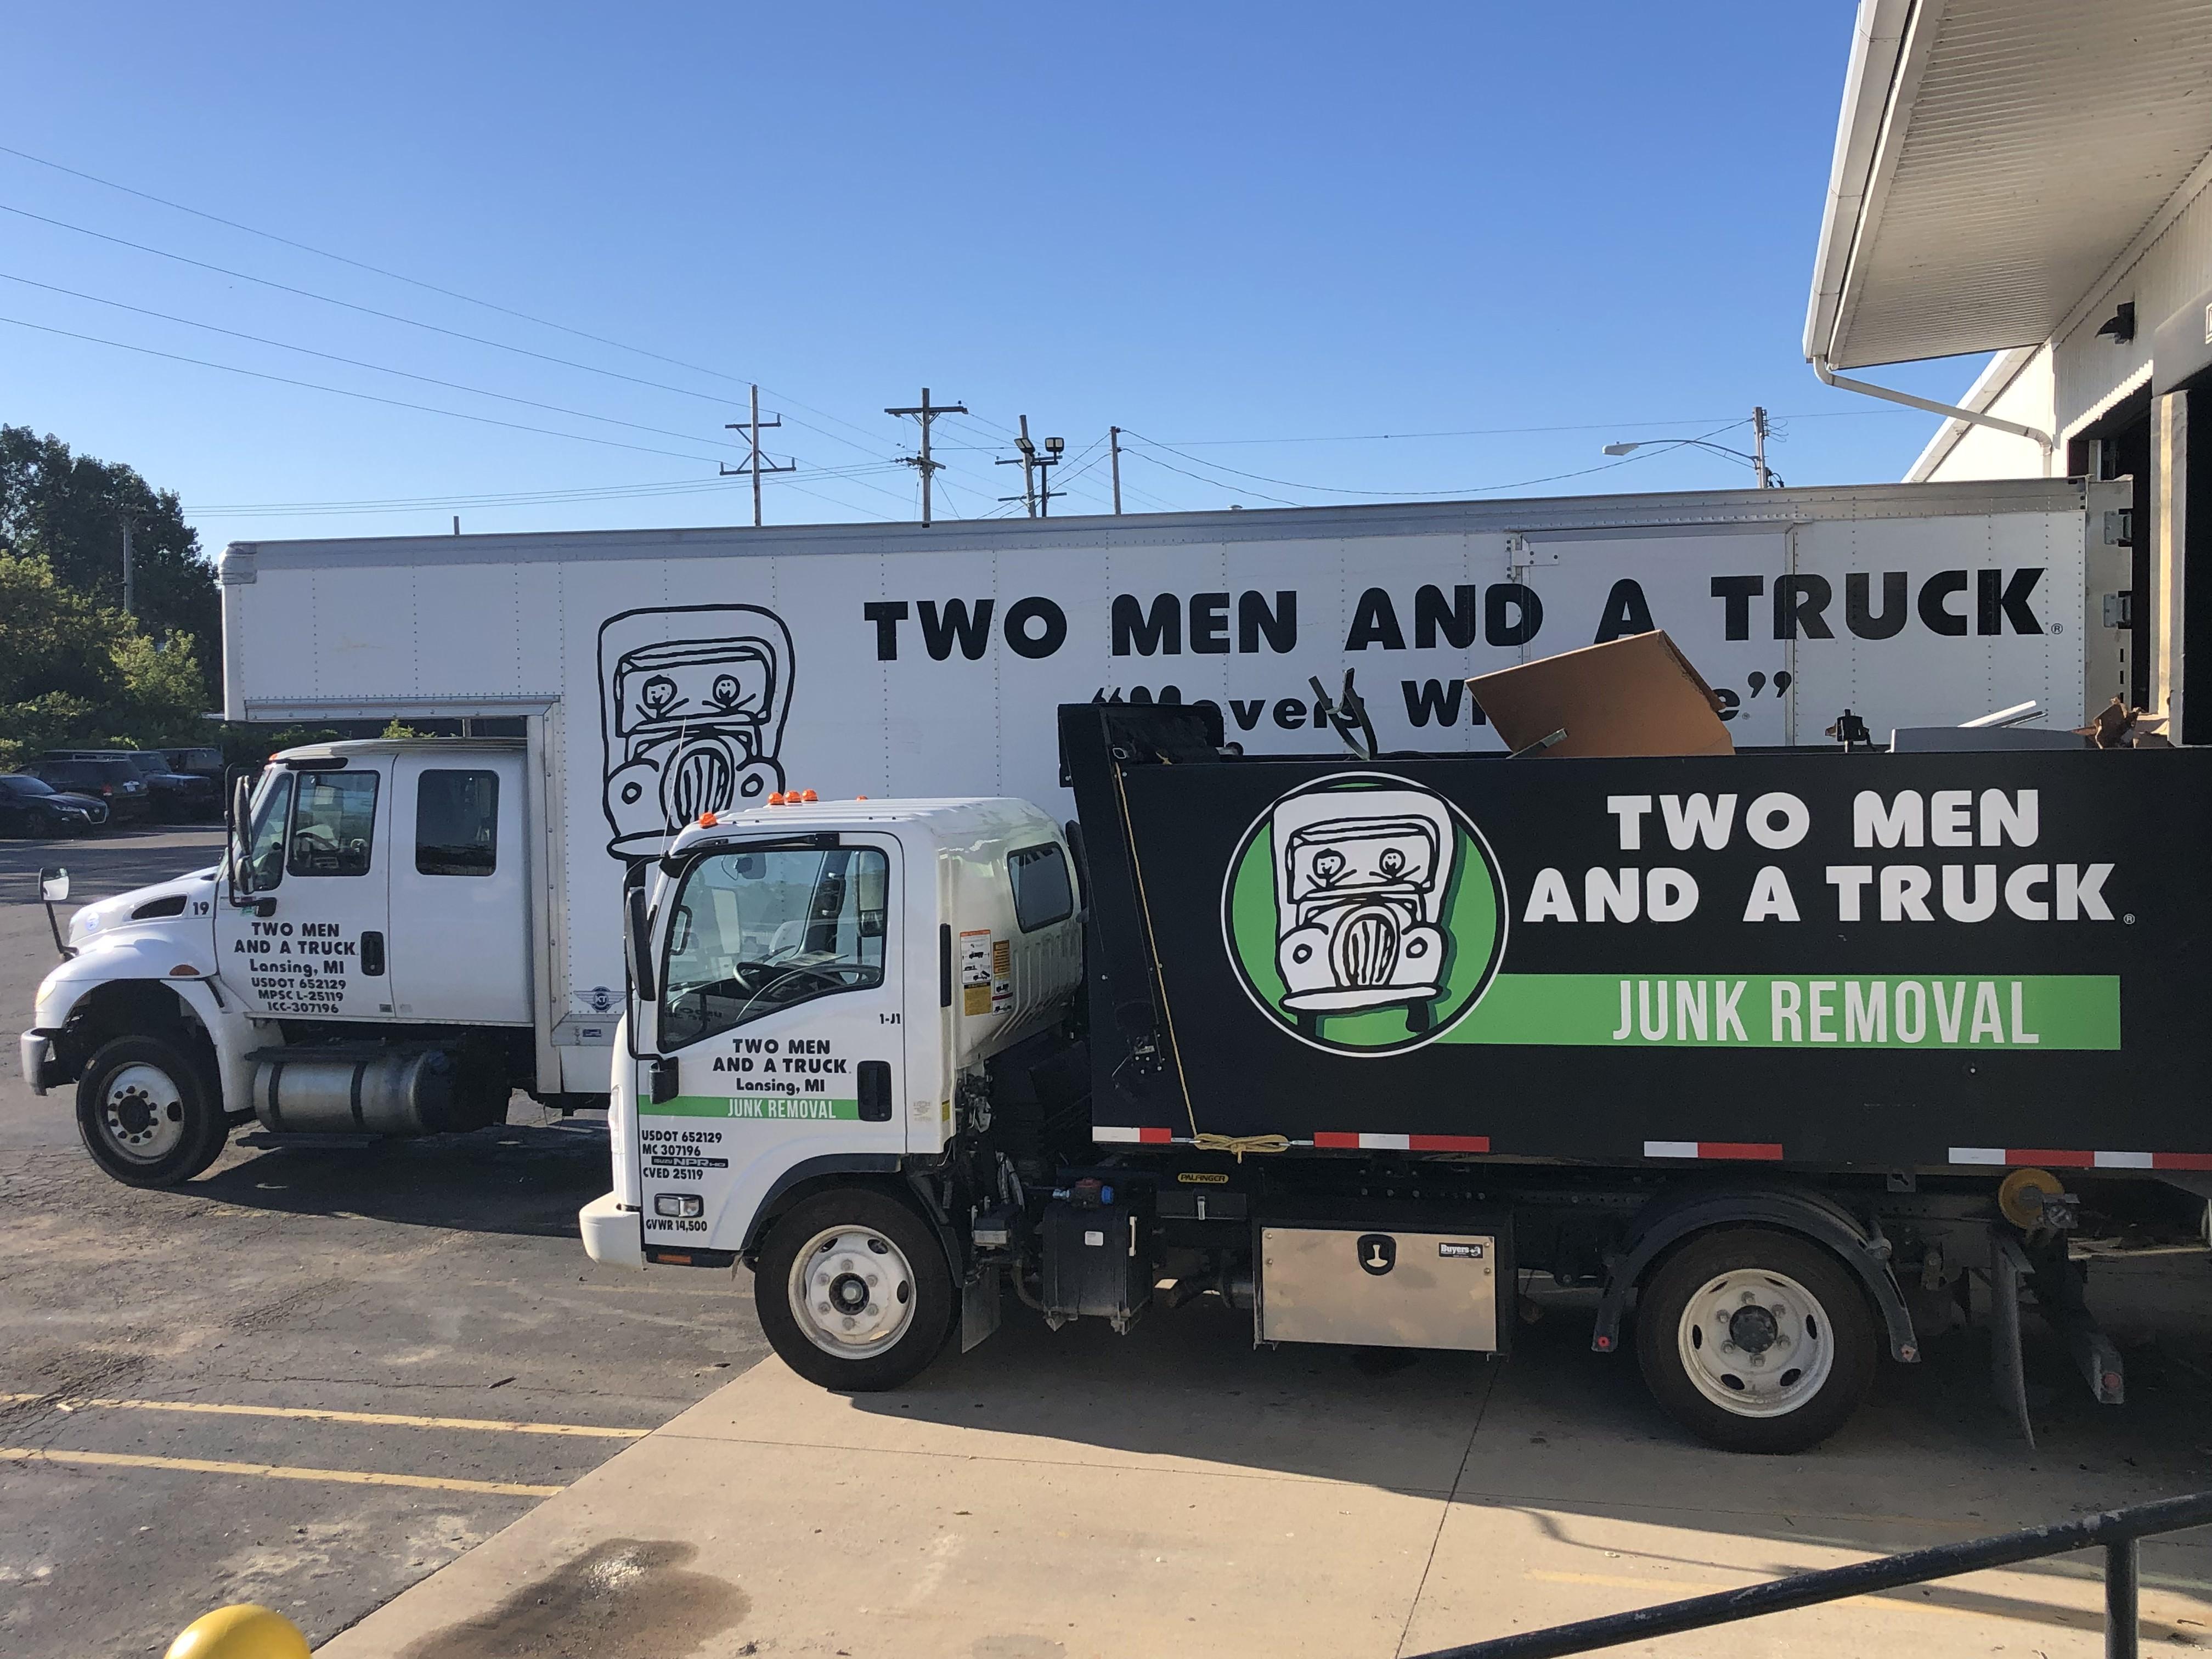 Our green and black junk truck next to our 26 foot moving truck